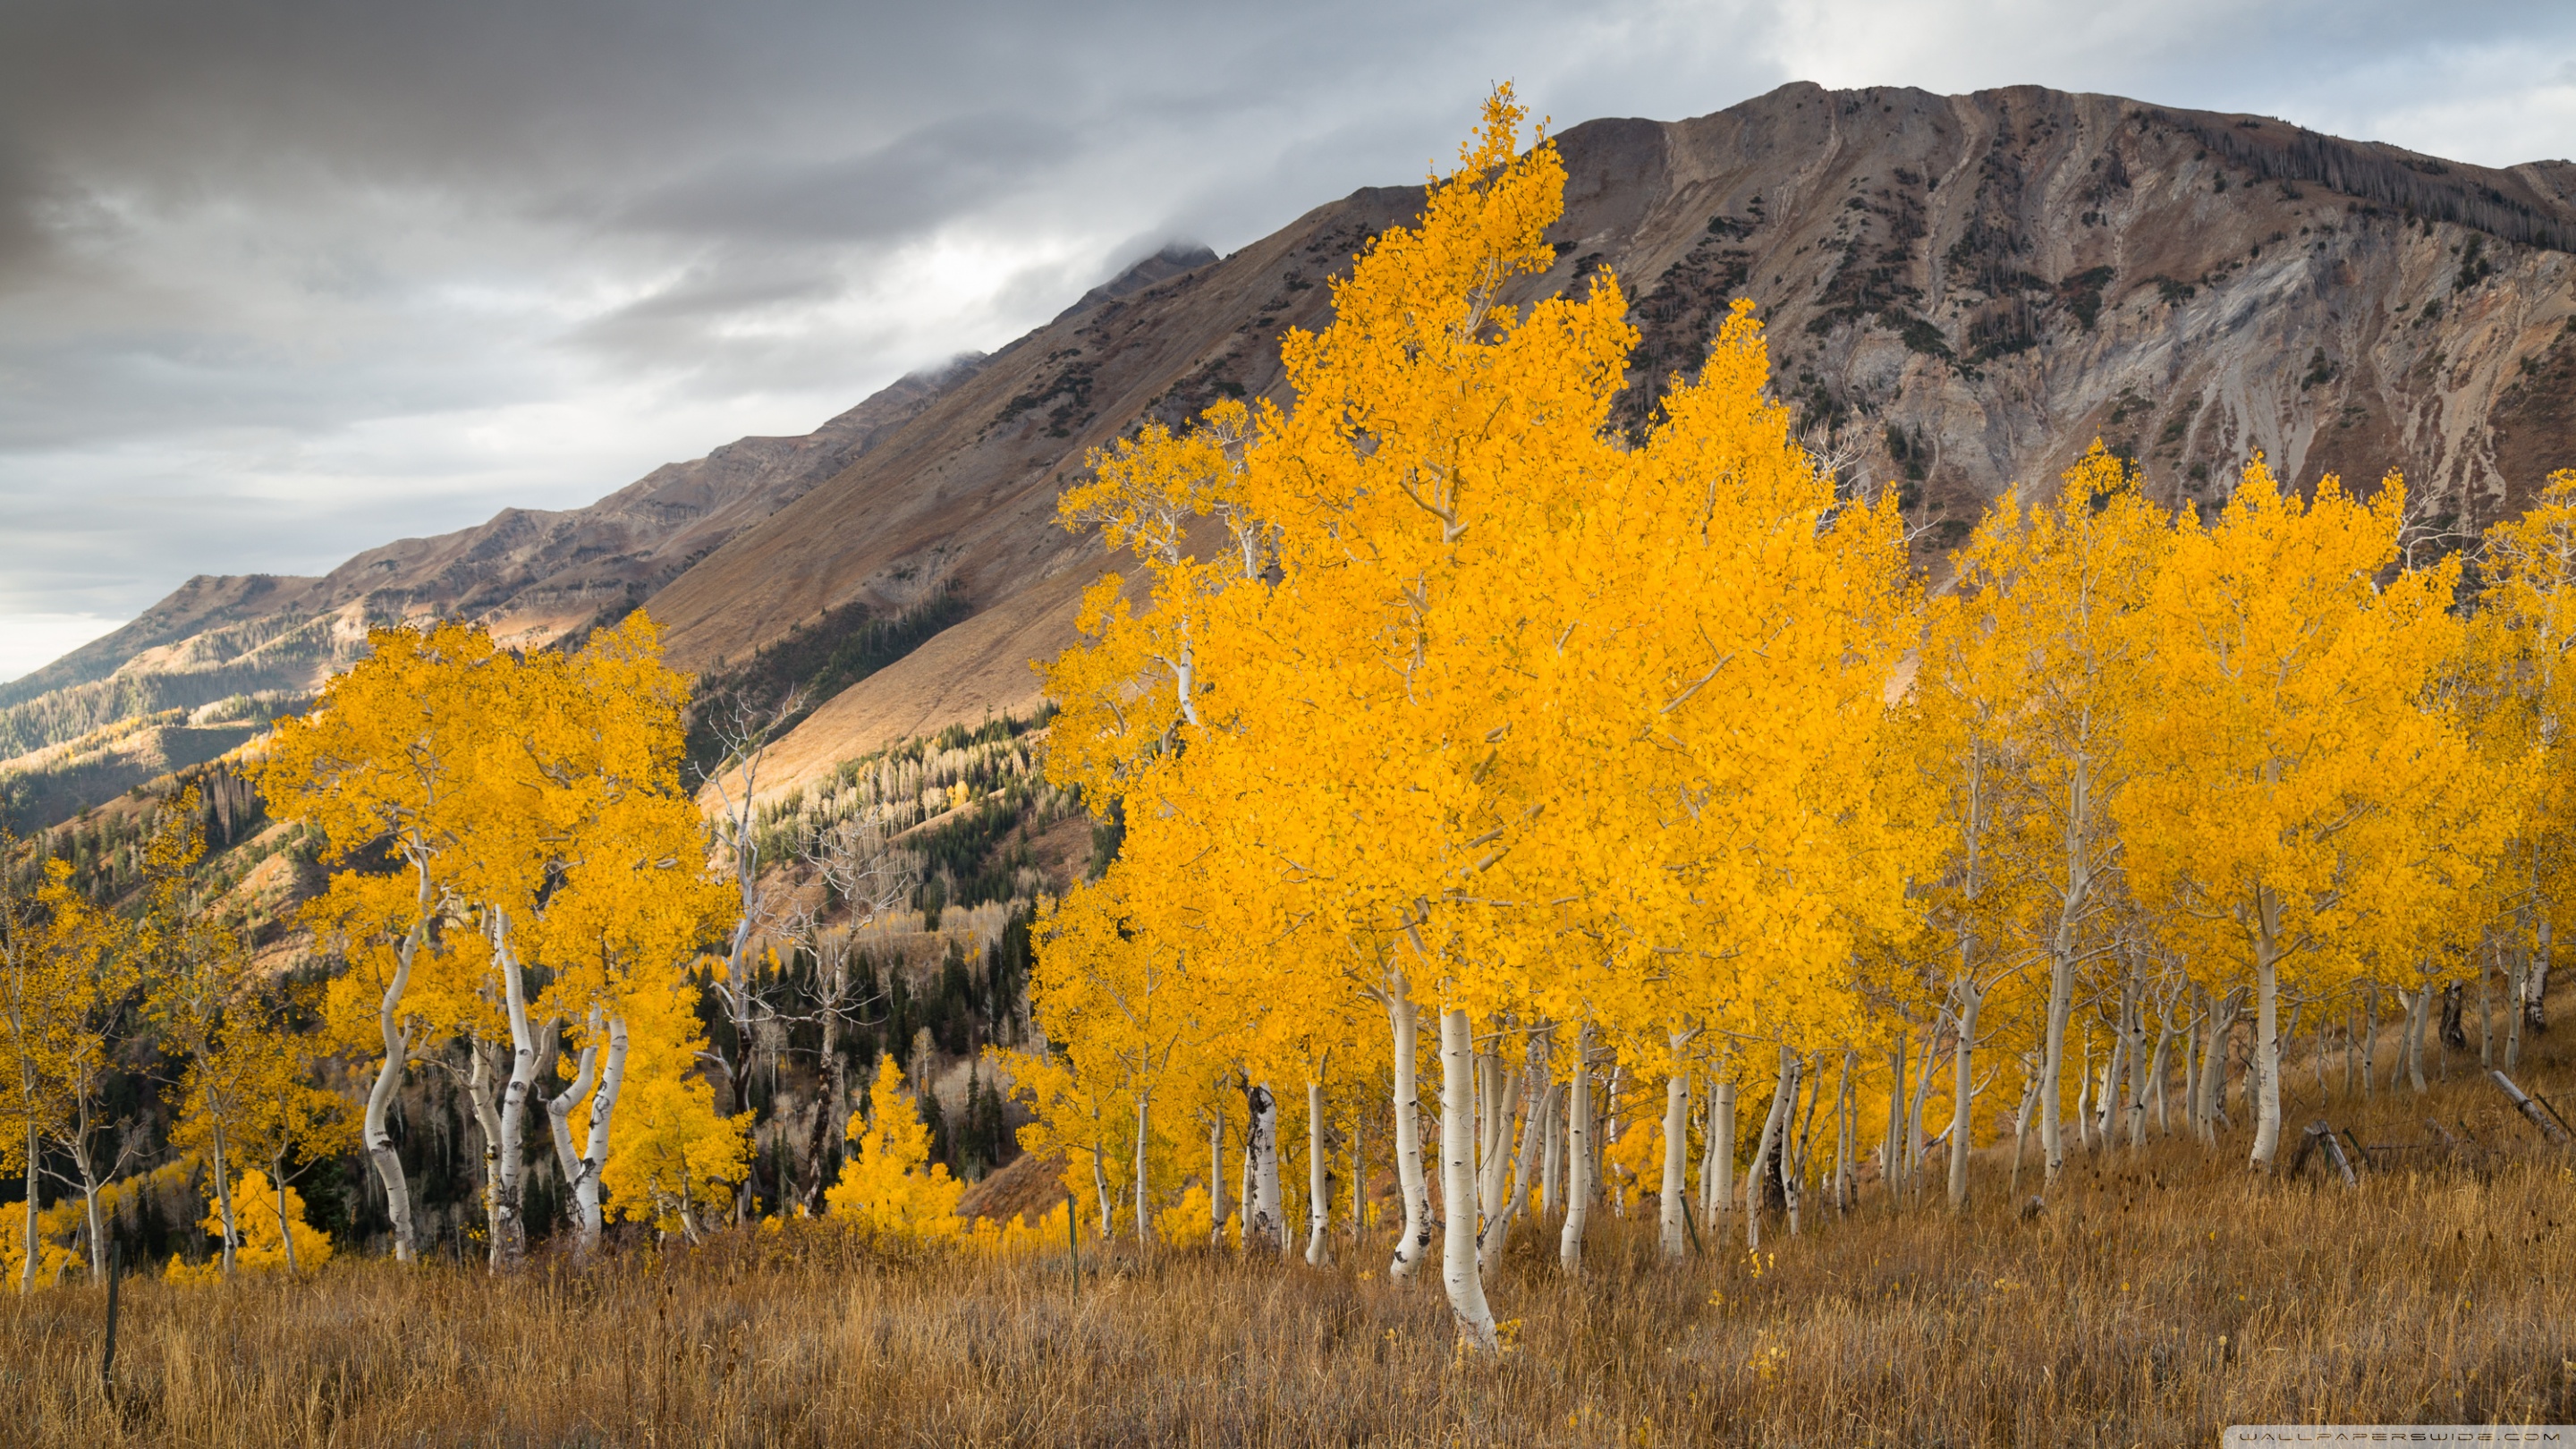 Aspen American Aspens Populus Tremuloide Shumen Tree Leaves With Golden  Yellow Splendid Colorado United States Desktop Hd Wallpaper For Pc Tablet  And Mobile 3840x2400  Wallpapers13com